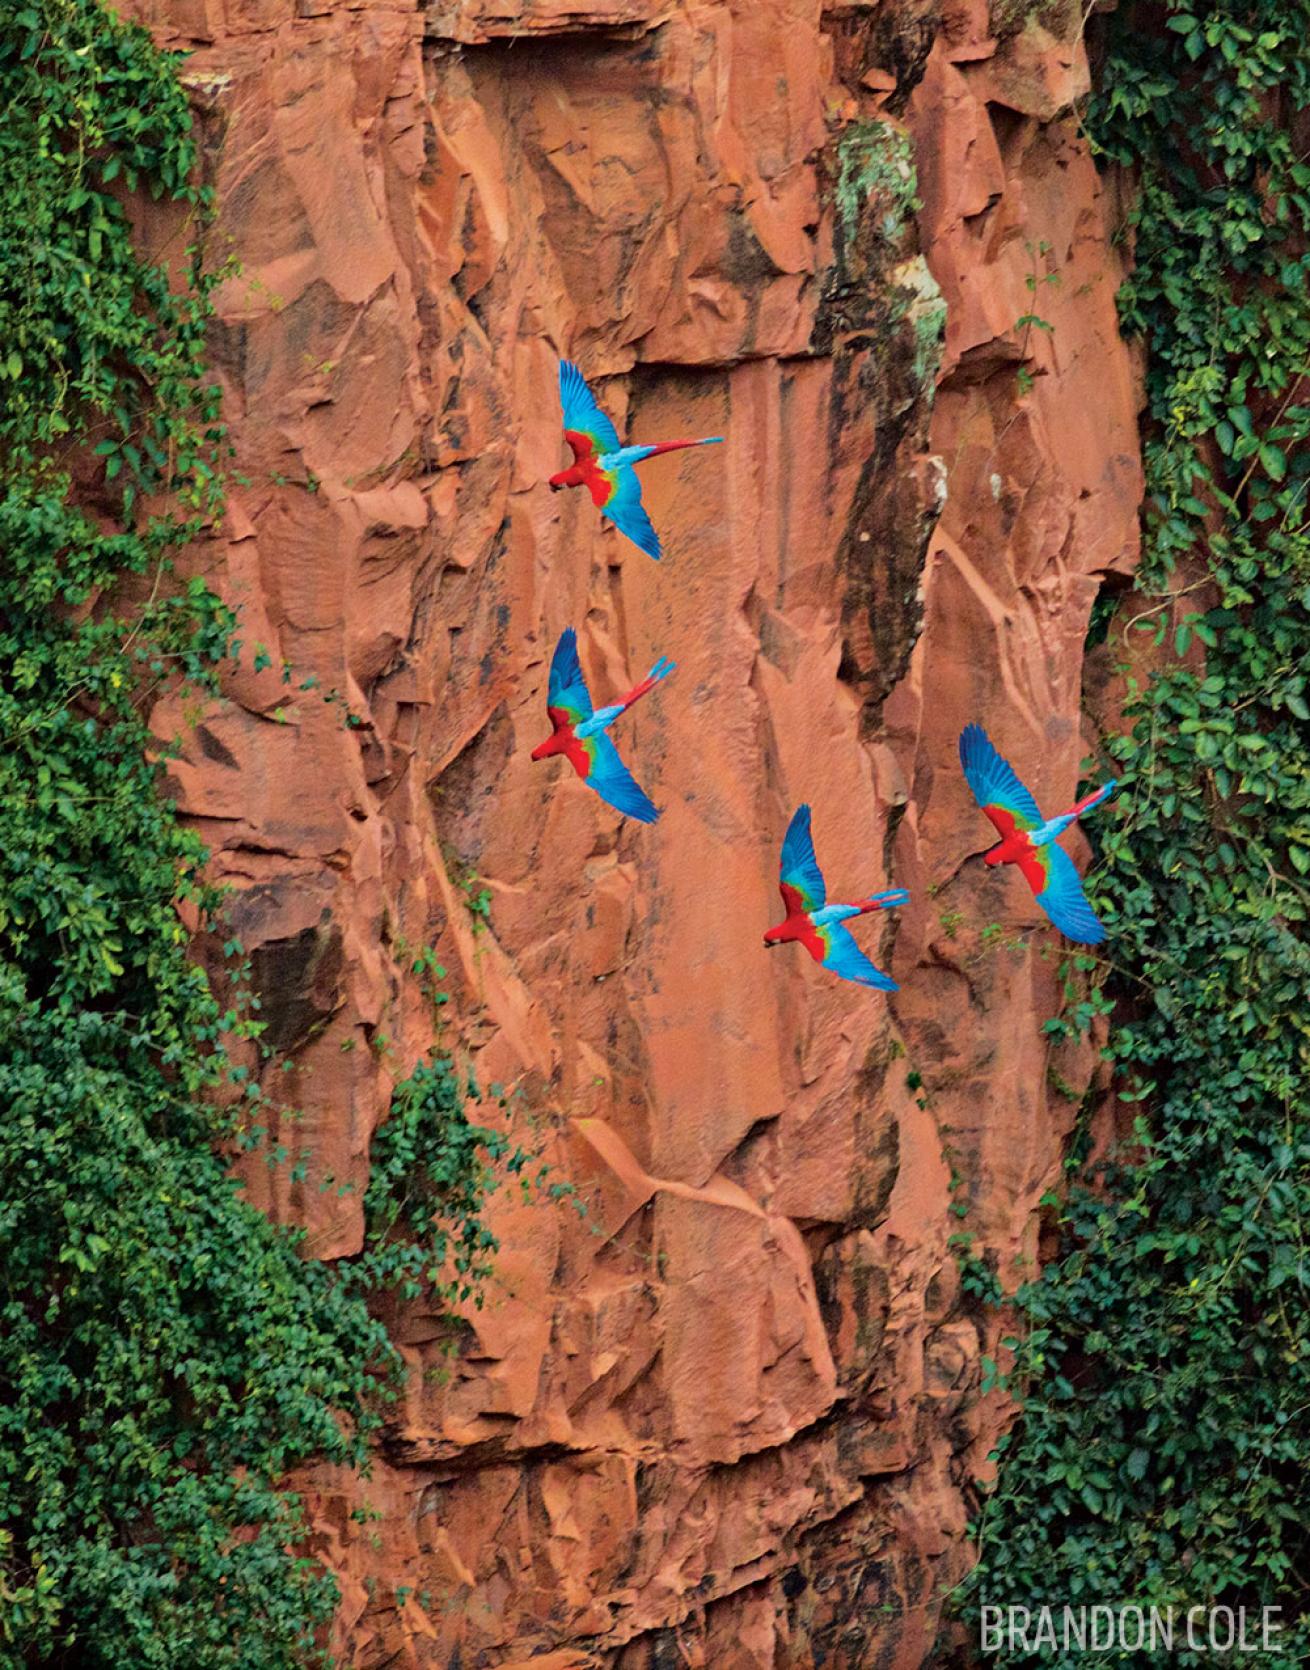 Green-winged macaws in Brazil